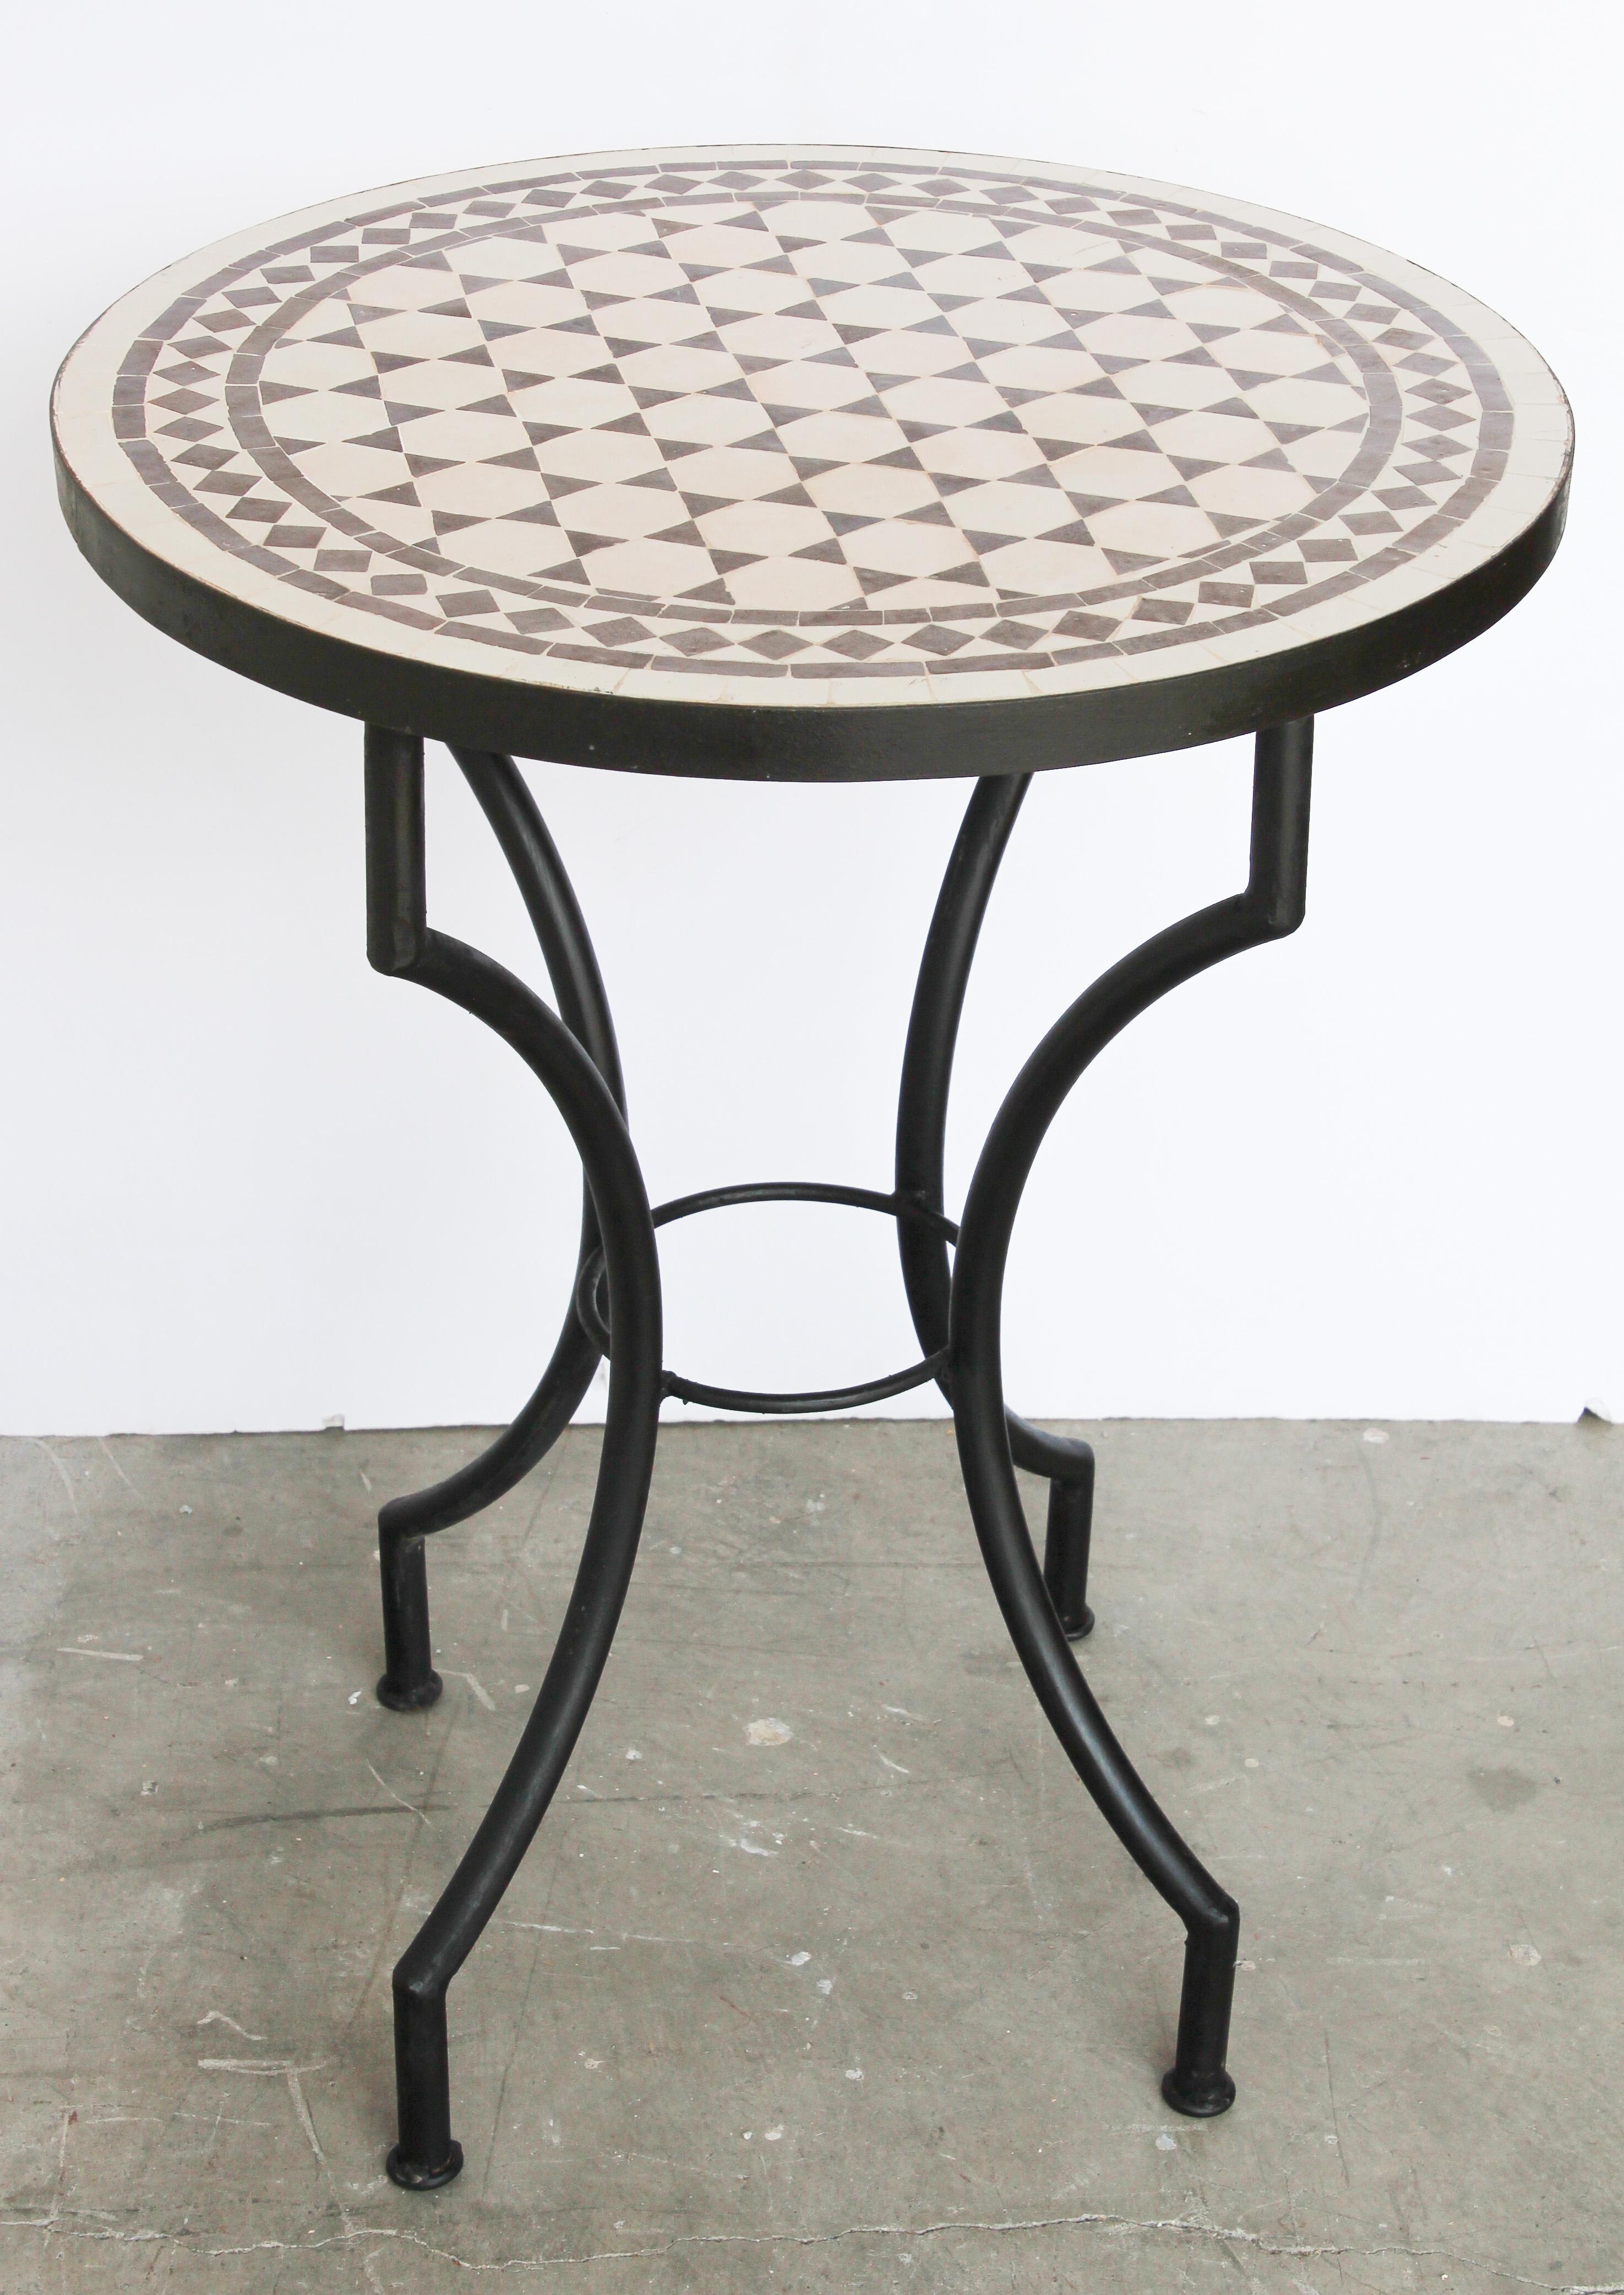 Moroccan mosaic tiles bistro table on iron base.
Handmade by expert artisans in Fez, Morocco using reclaimed old glazed brown and white colors tiles inlaid in concrete and making beautiful geometrical Moorish Fez designs, colors are brown and